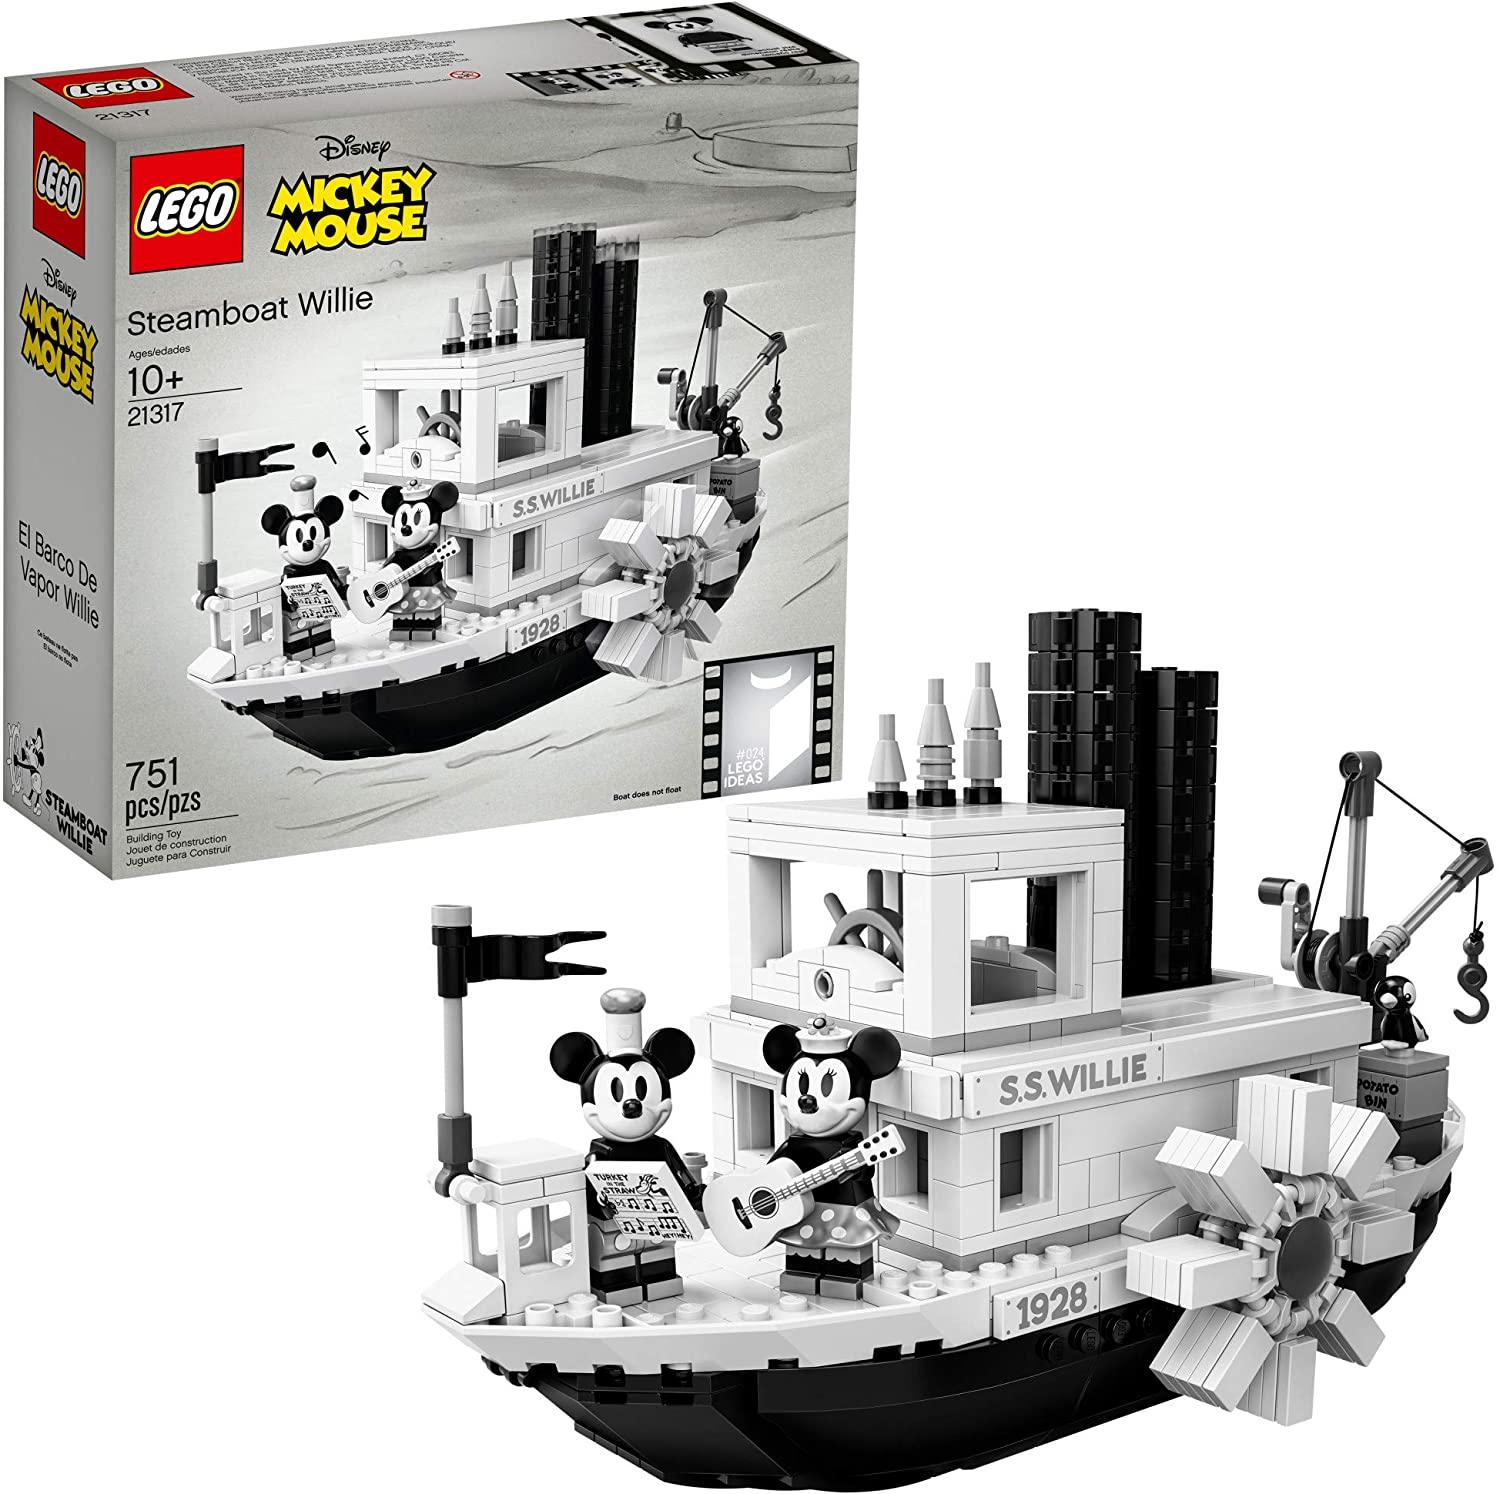 LEGO Disney Mickey Mouse Steamboat Willie Building Kit for $79.99 Shipped